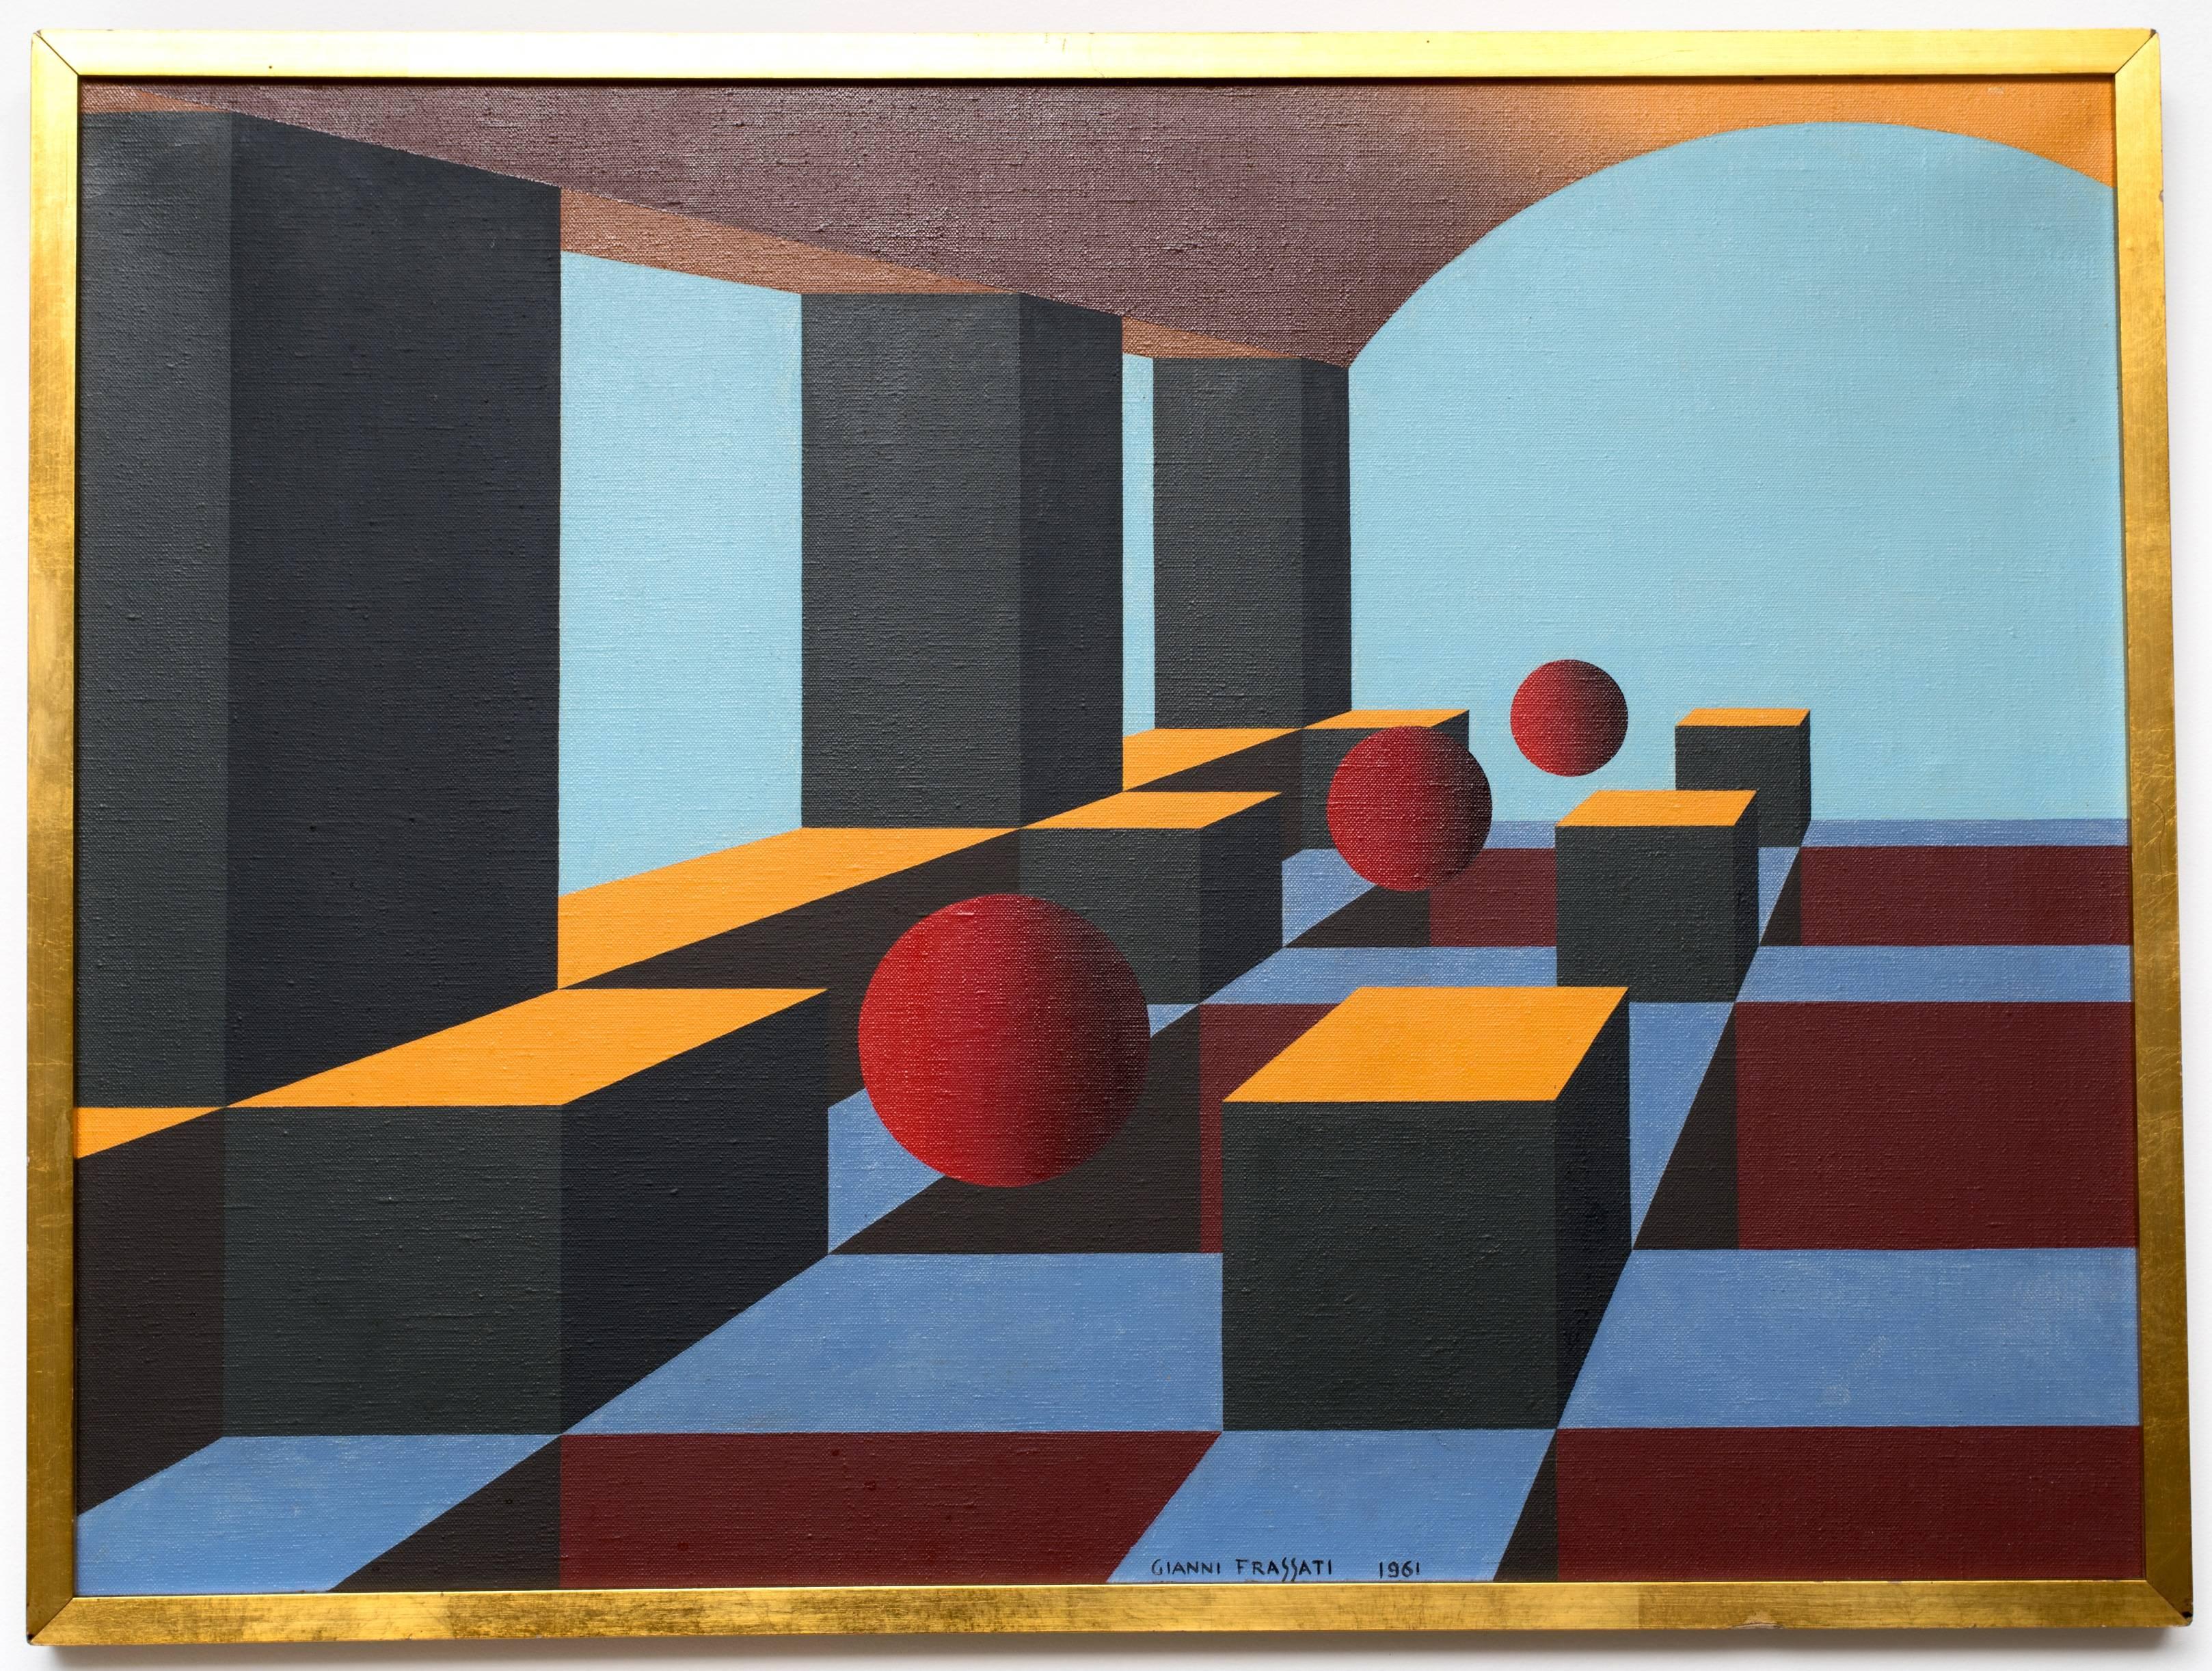 Stunning Geometric Abstract painting by Listed Italian Artist Gianni Frassati (1924). Most of his work depicts these intricate surrealistic landscapes with geometric three-dimensional planar spaces in primary colors. Signed Gianni Frassati, 1961. An